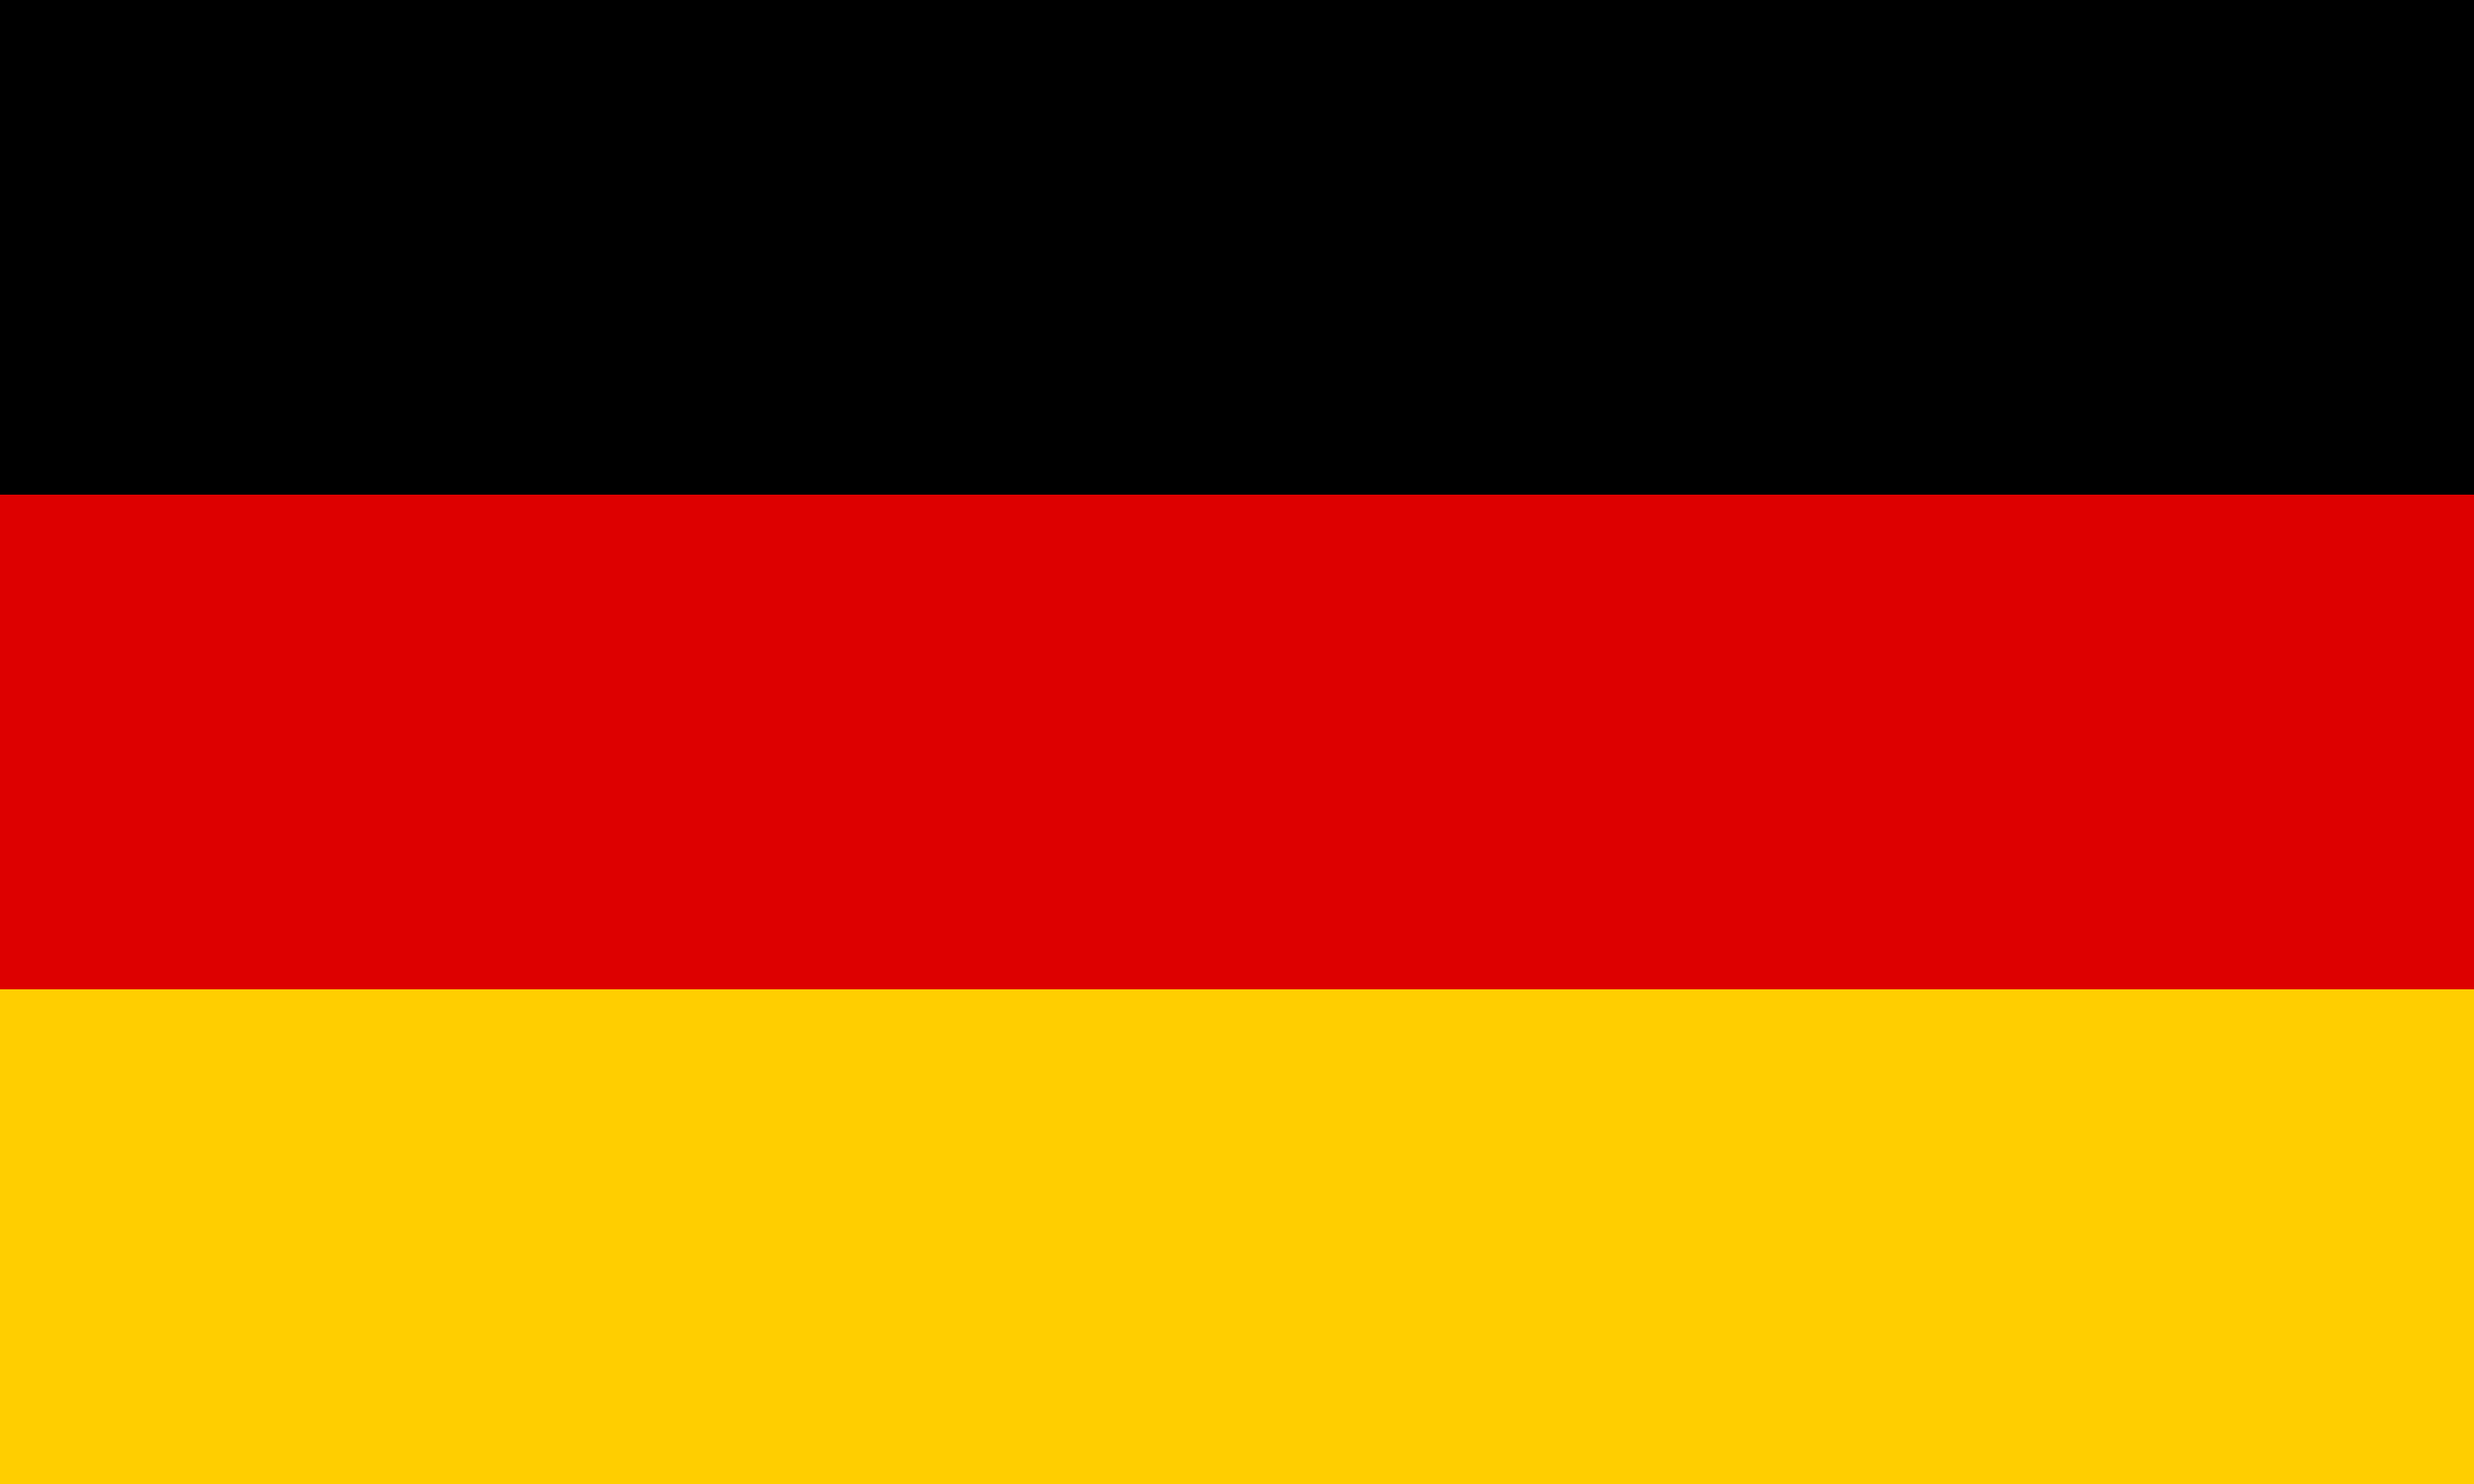 Drone Laws in Germany